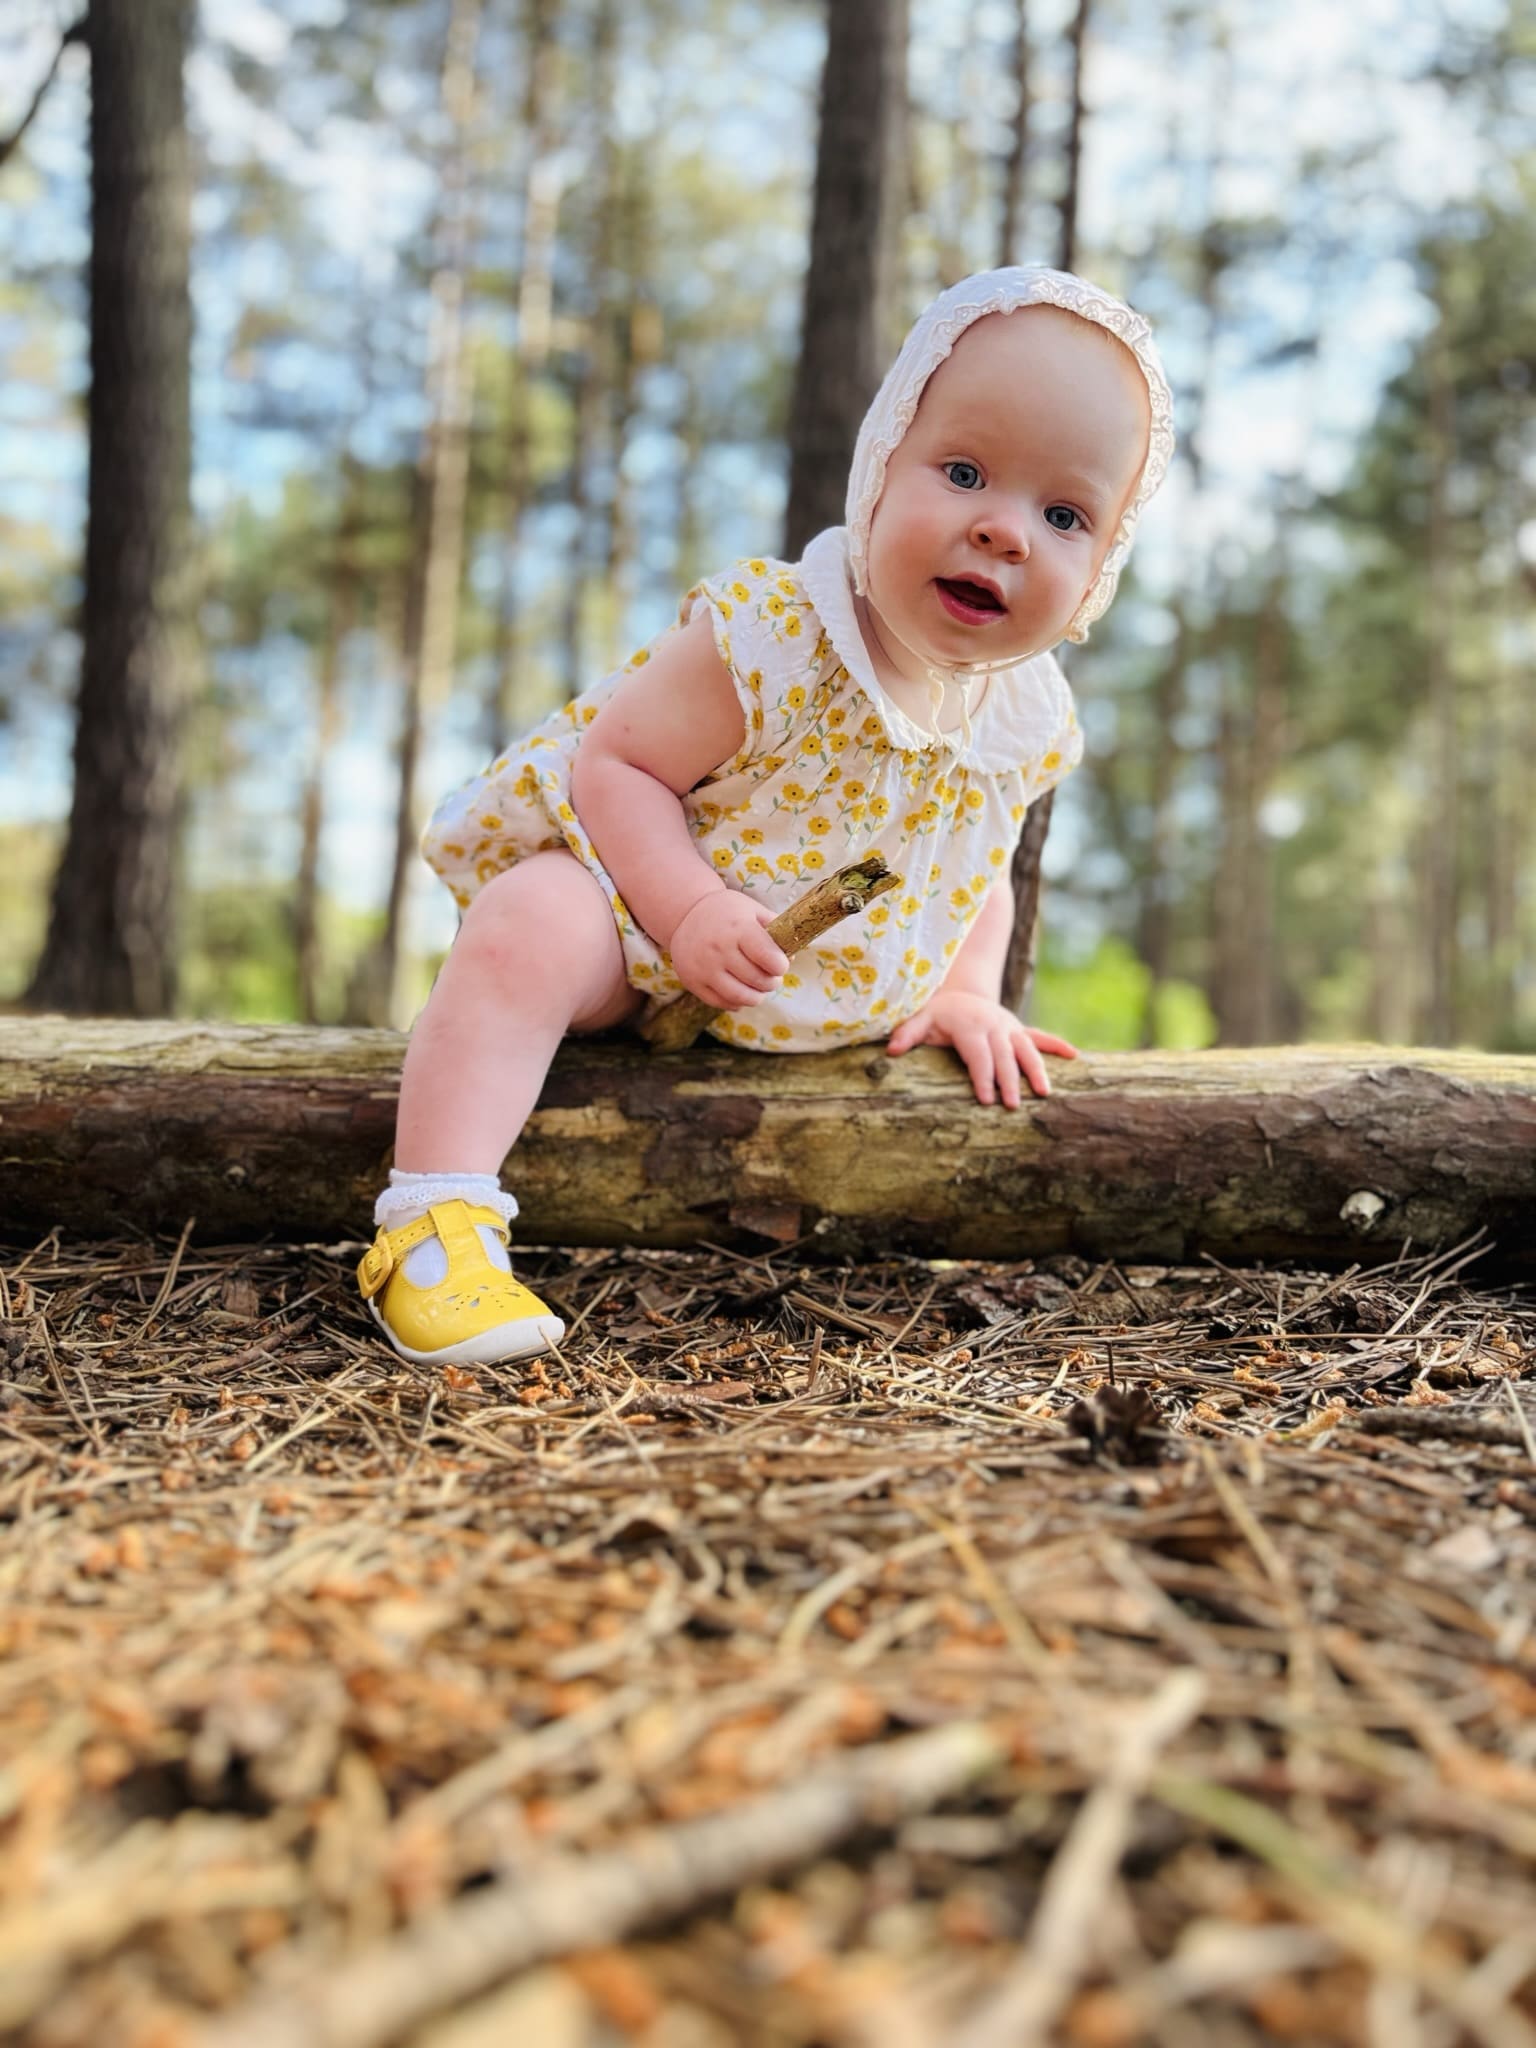 Baby Aila playing with sticks in the woods